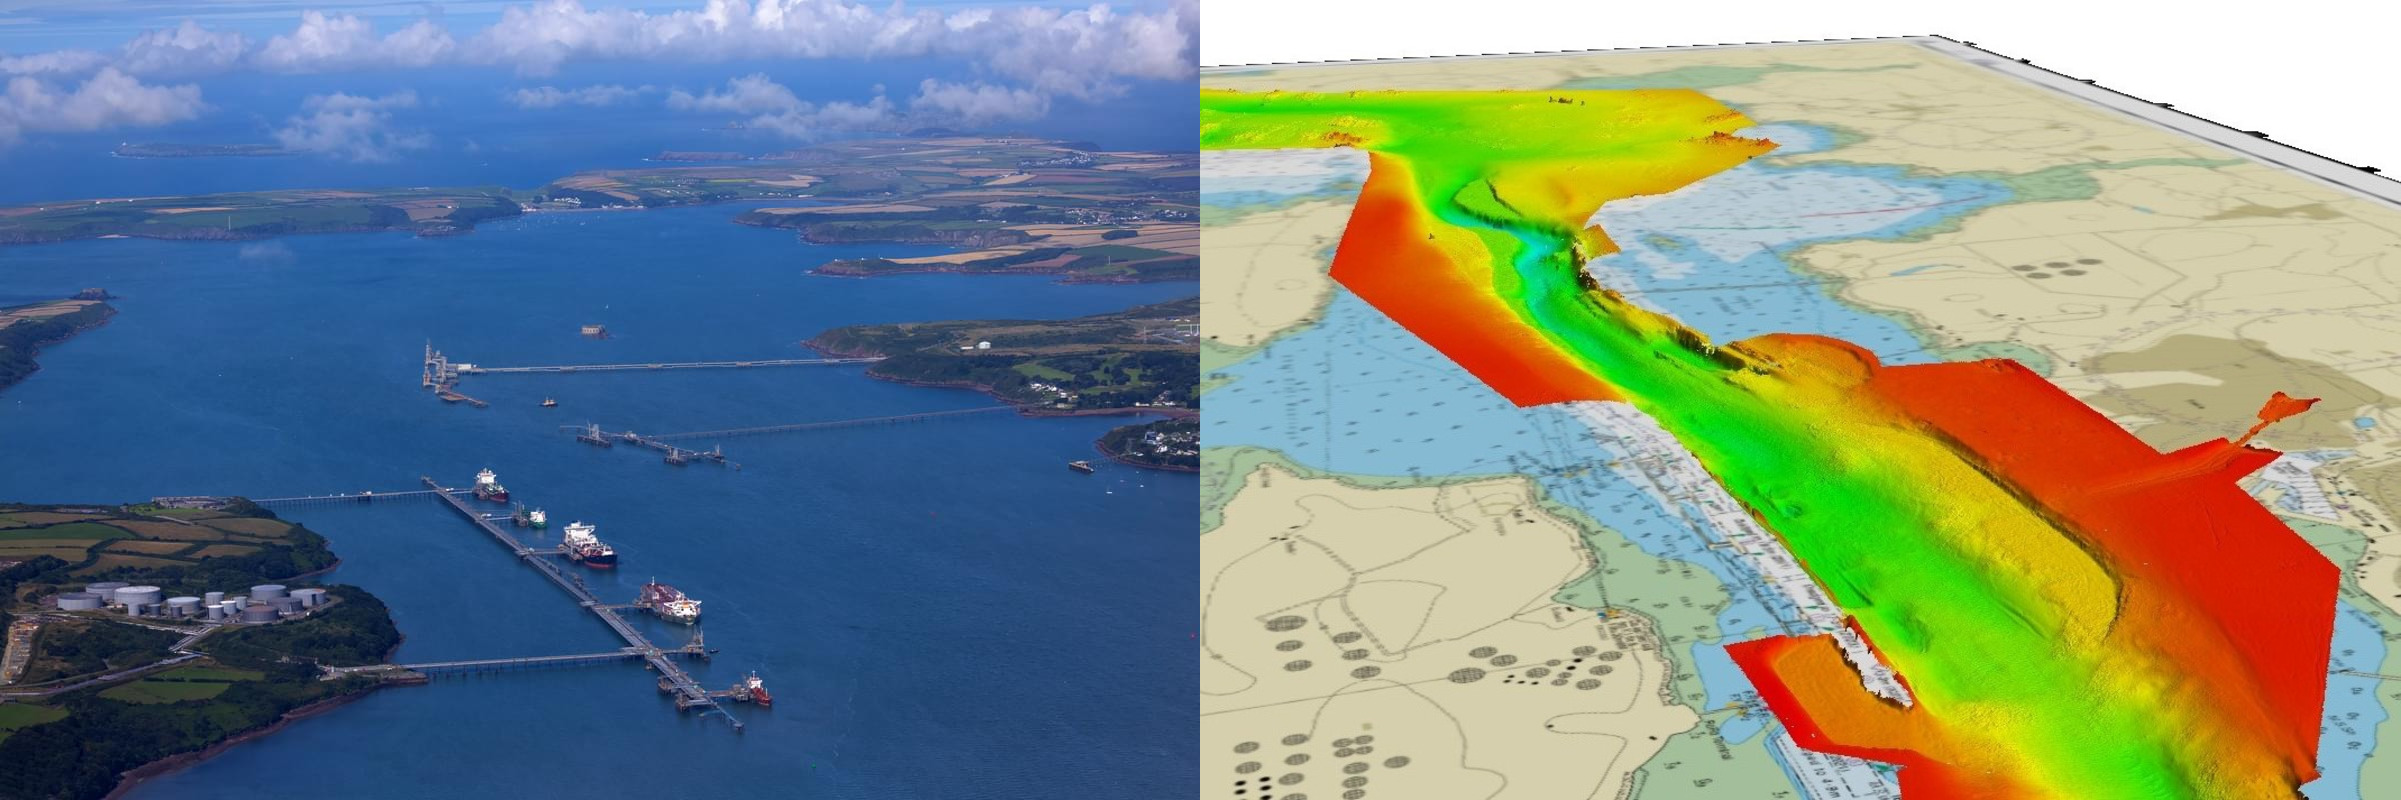 Aerial image of milford haven next to chart coverage of milford haven with bathymetry overlaid